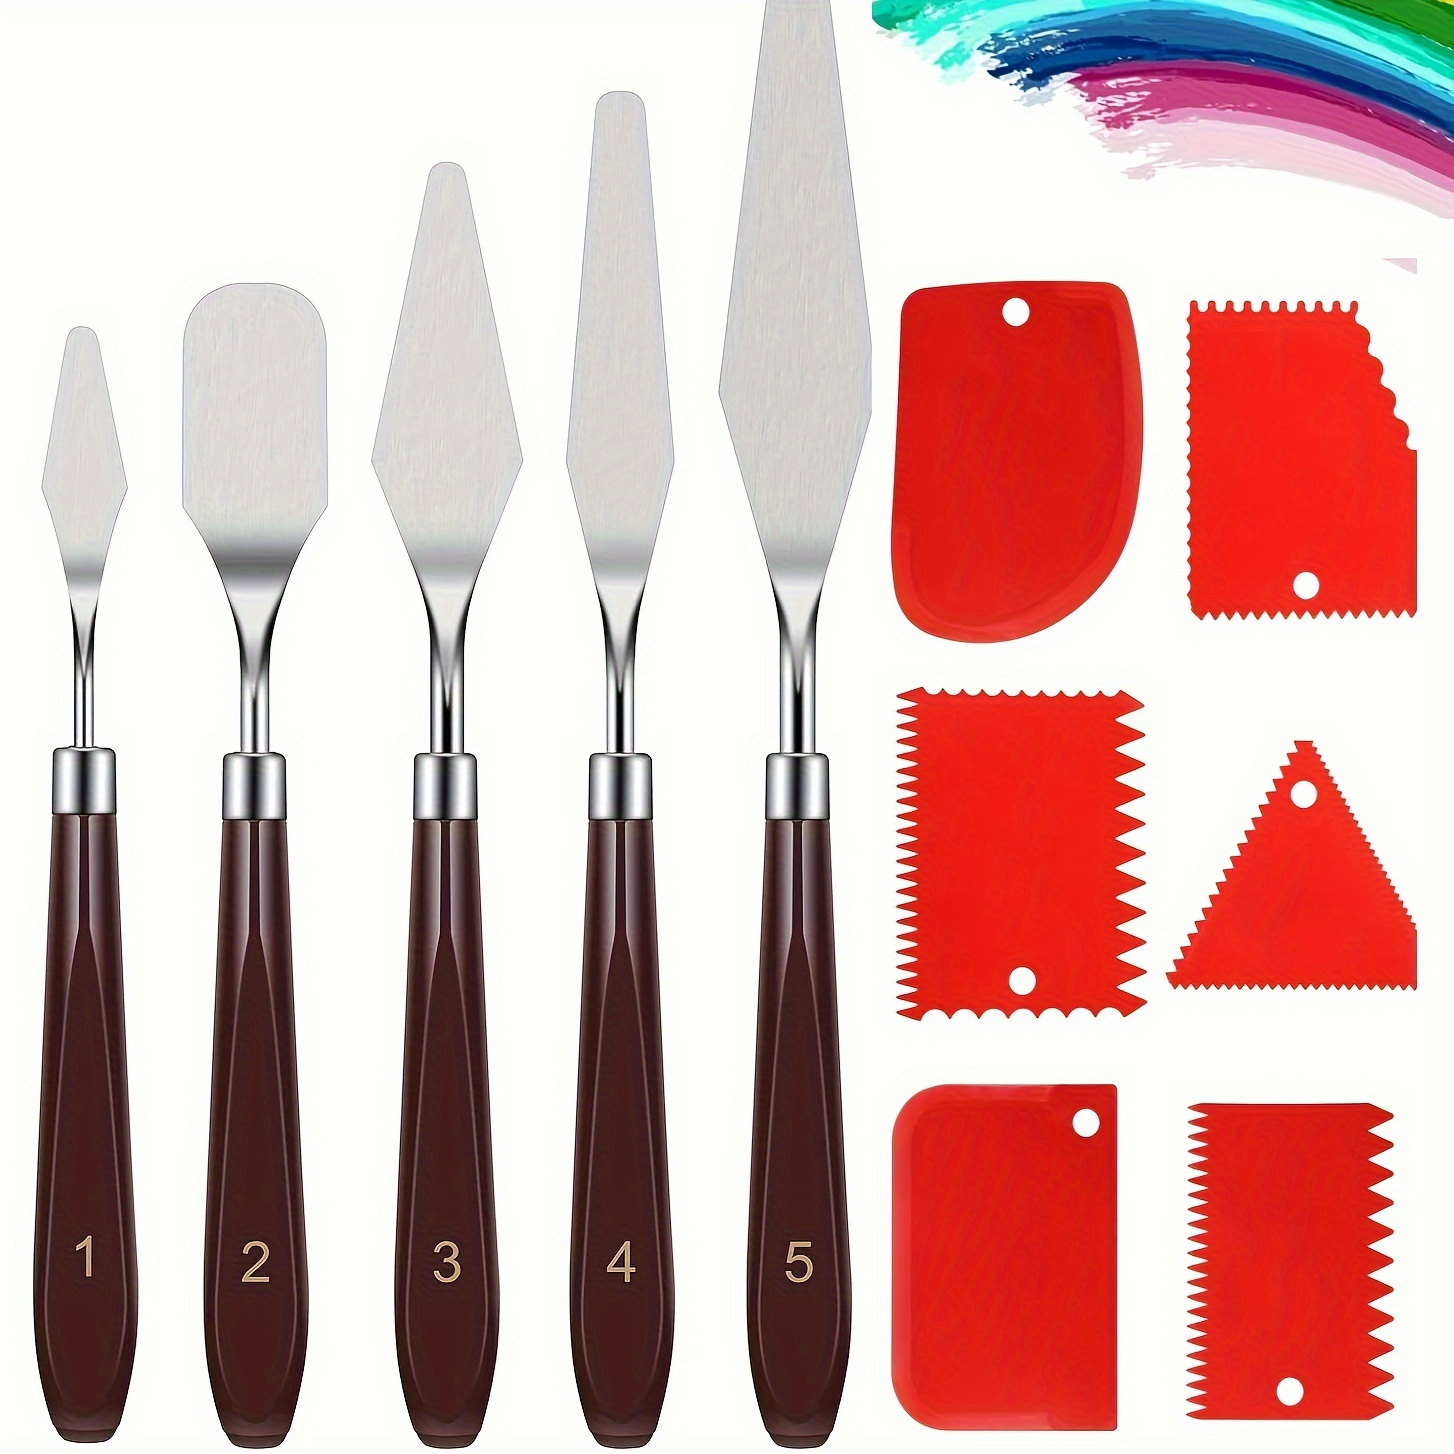 

Artist's Stainless Steel Palette Knife Set - 11pc, 5pc, Or 6pc Options With Texture Paste & Tooth Scrapers For Acrylic, Oil, Watercolor, And Rock Painting